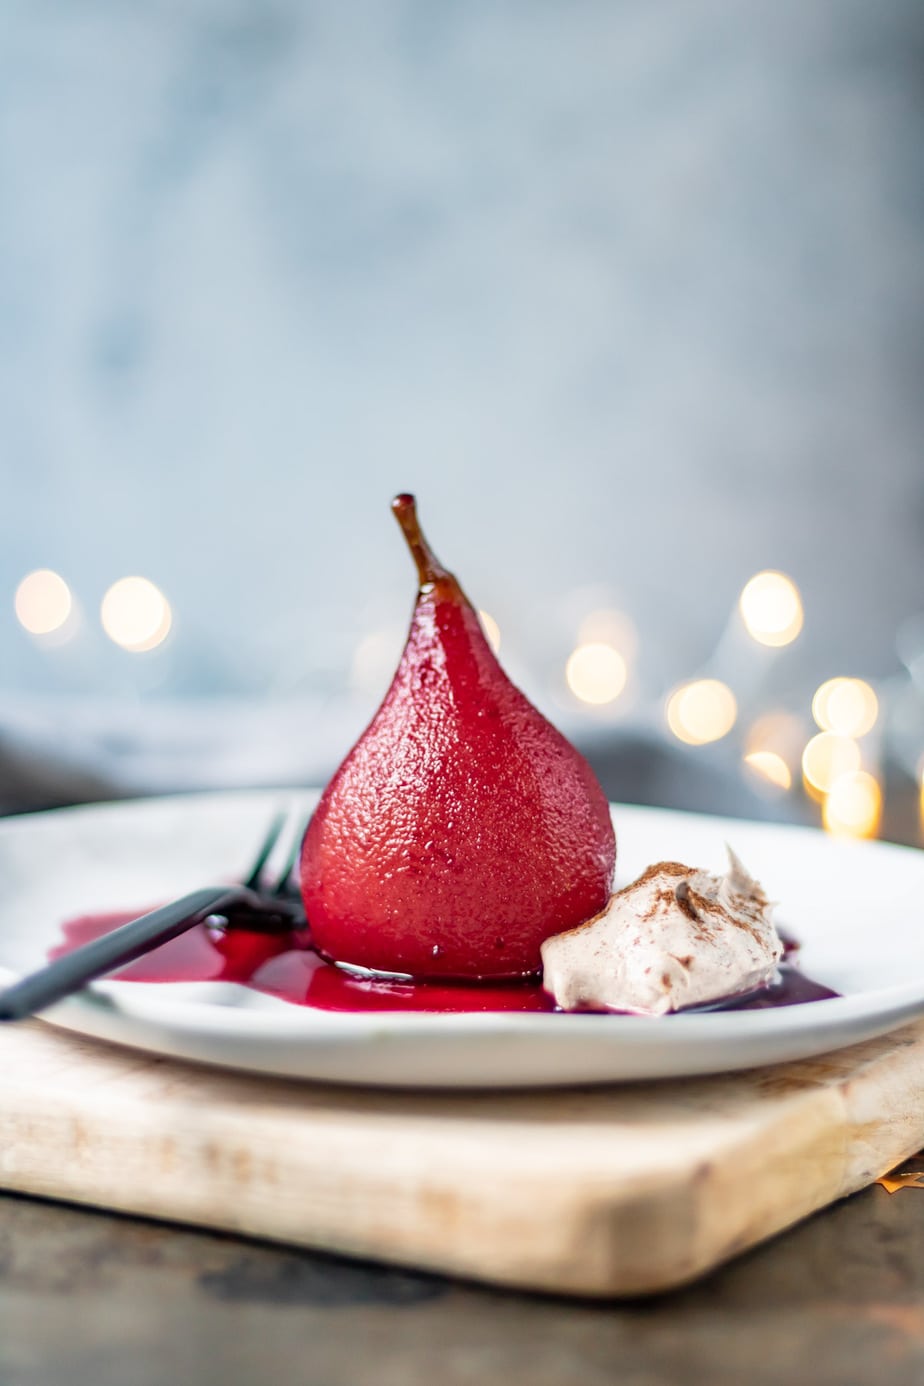 Poached pear on a plate.